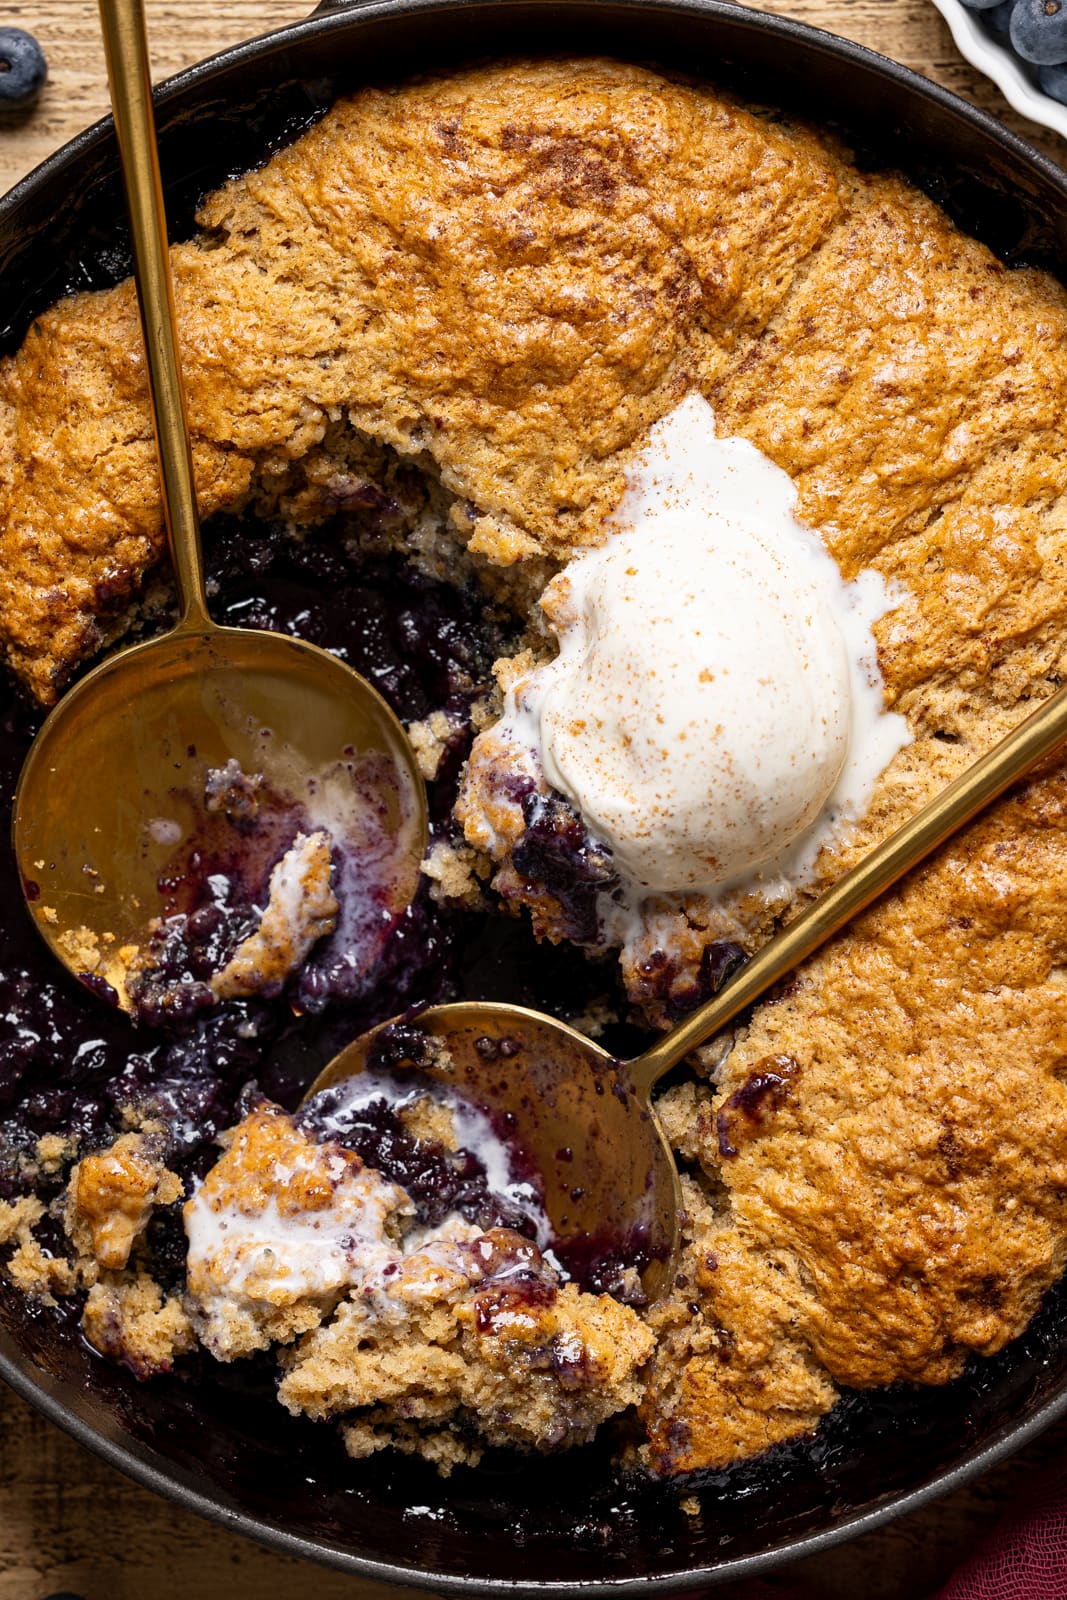 Cobbler in a black skillet with scoops of ice cream and two serving spoons.